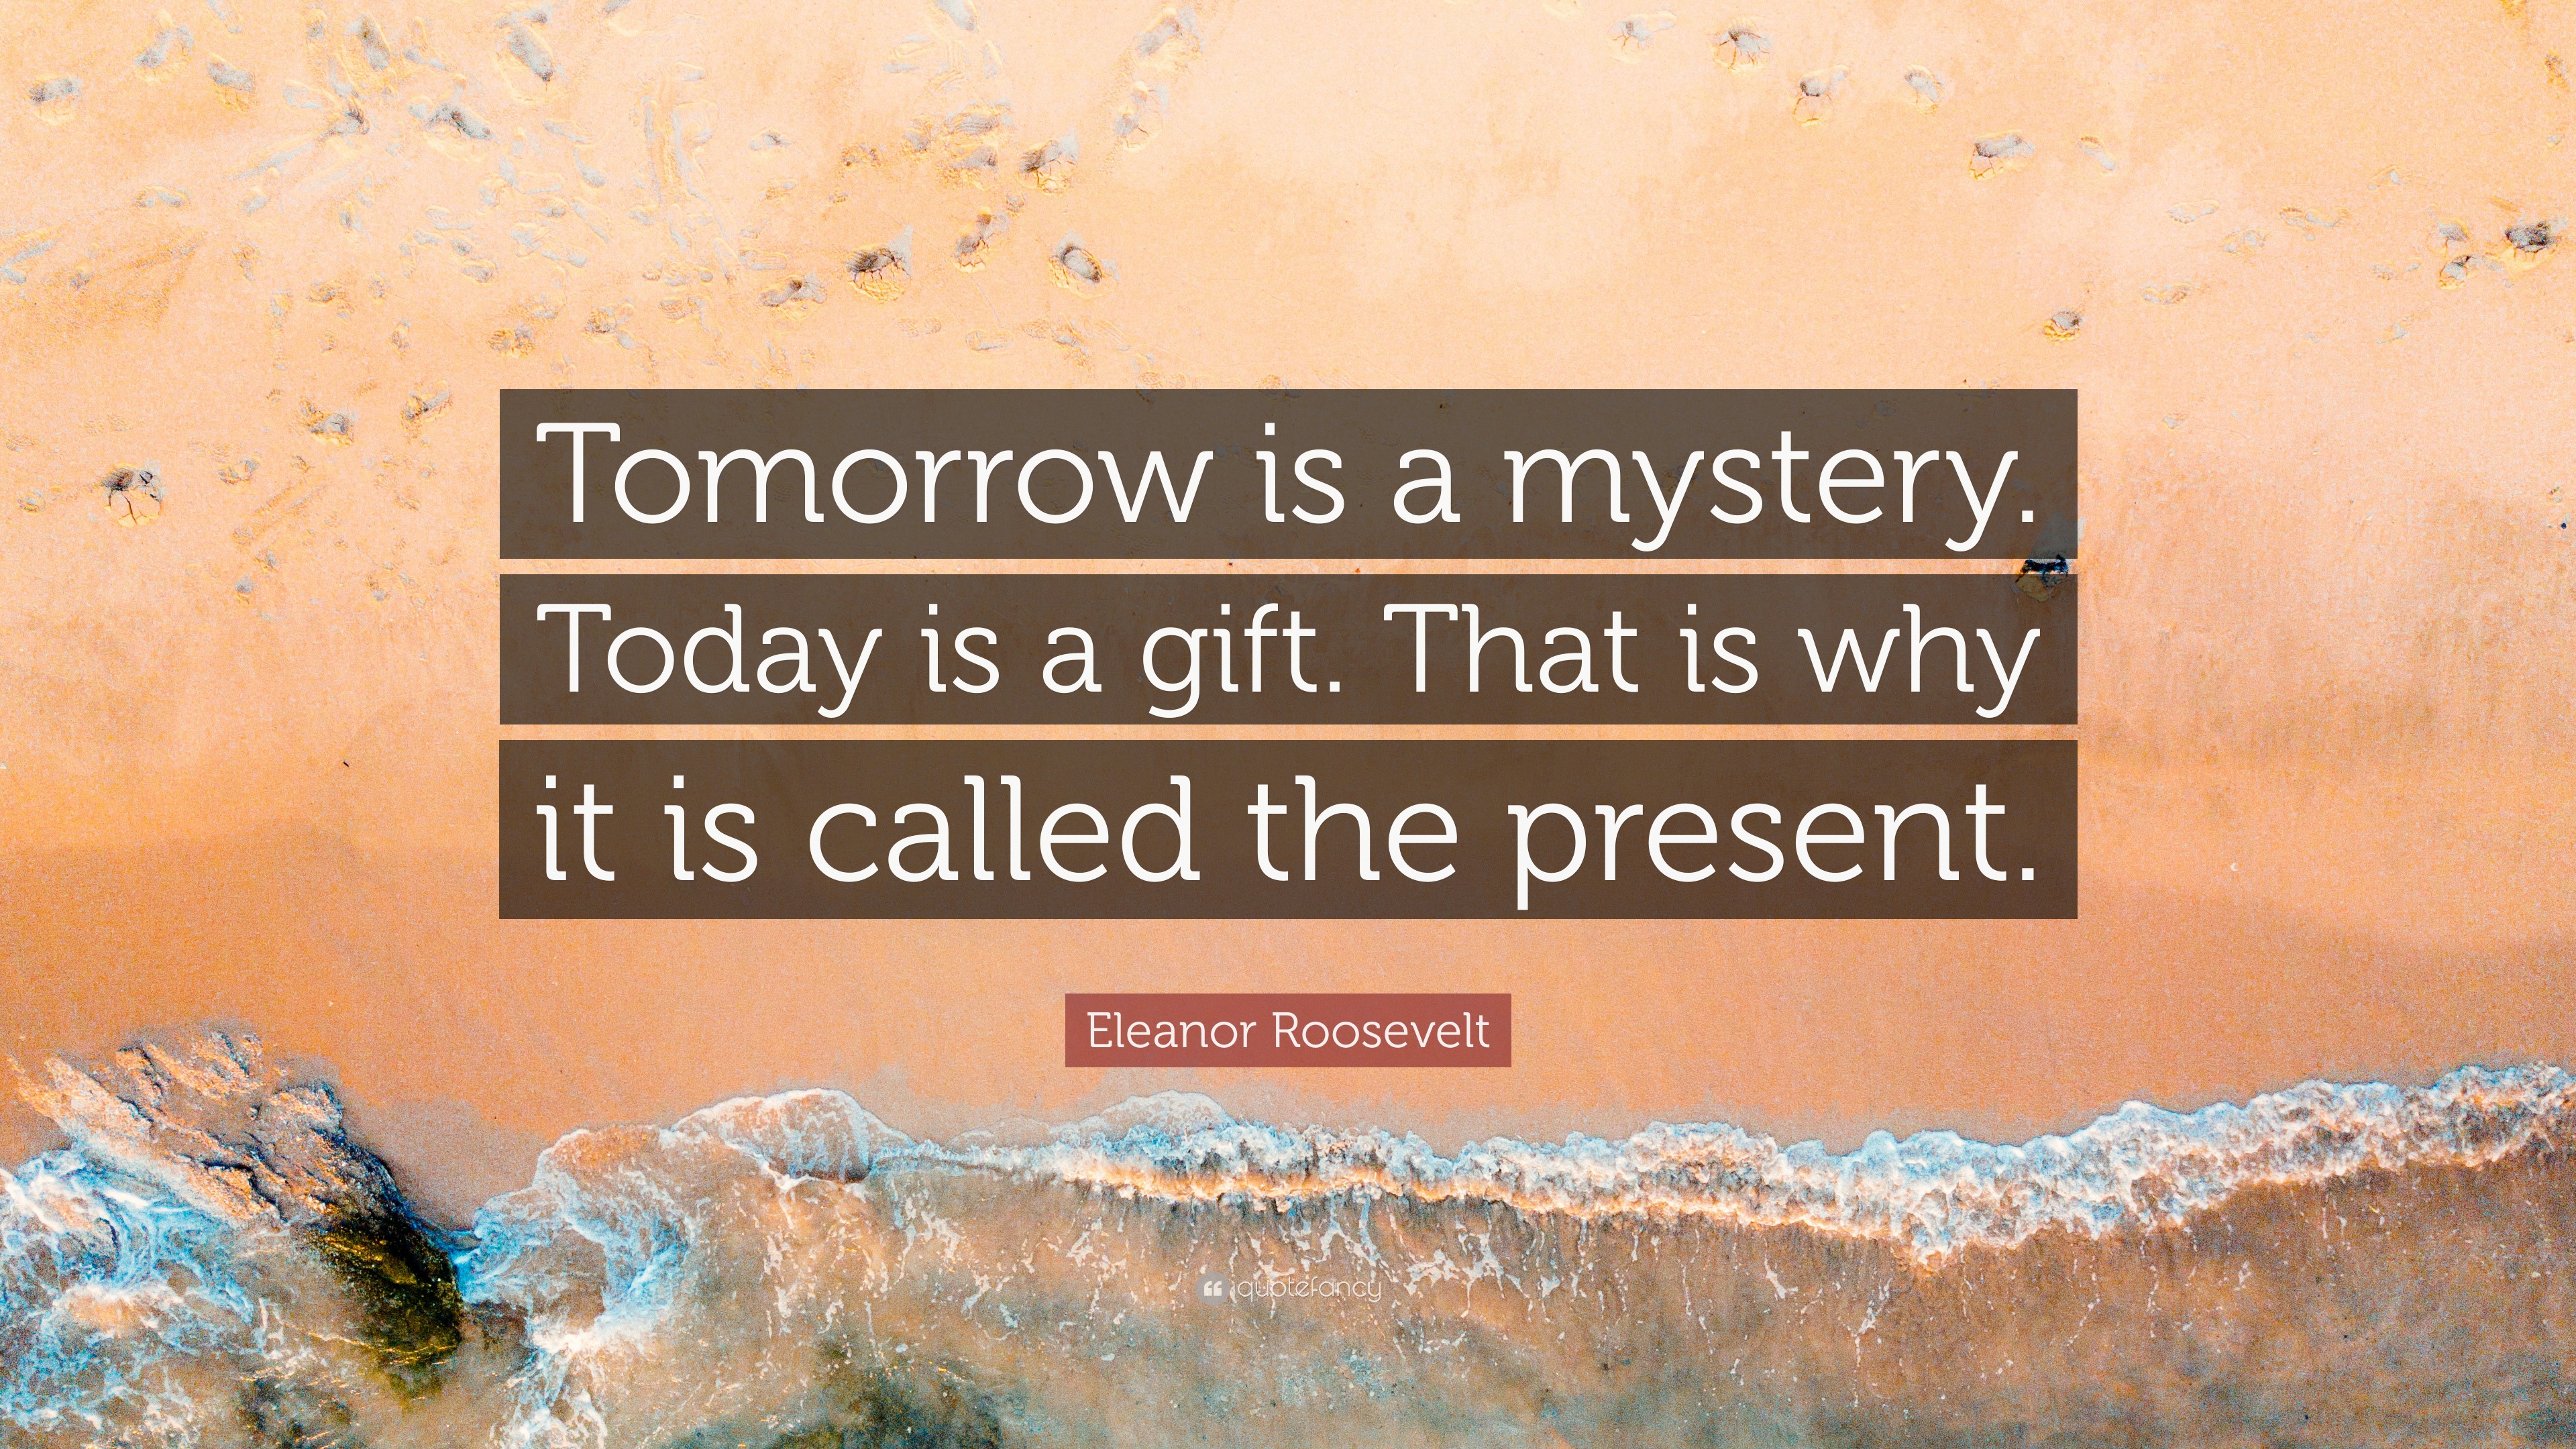 Eleanor Roosevelt Quote: “Tomorrow Is A Mystery. Today Is A Gift. That Is Why It Is